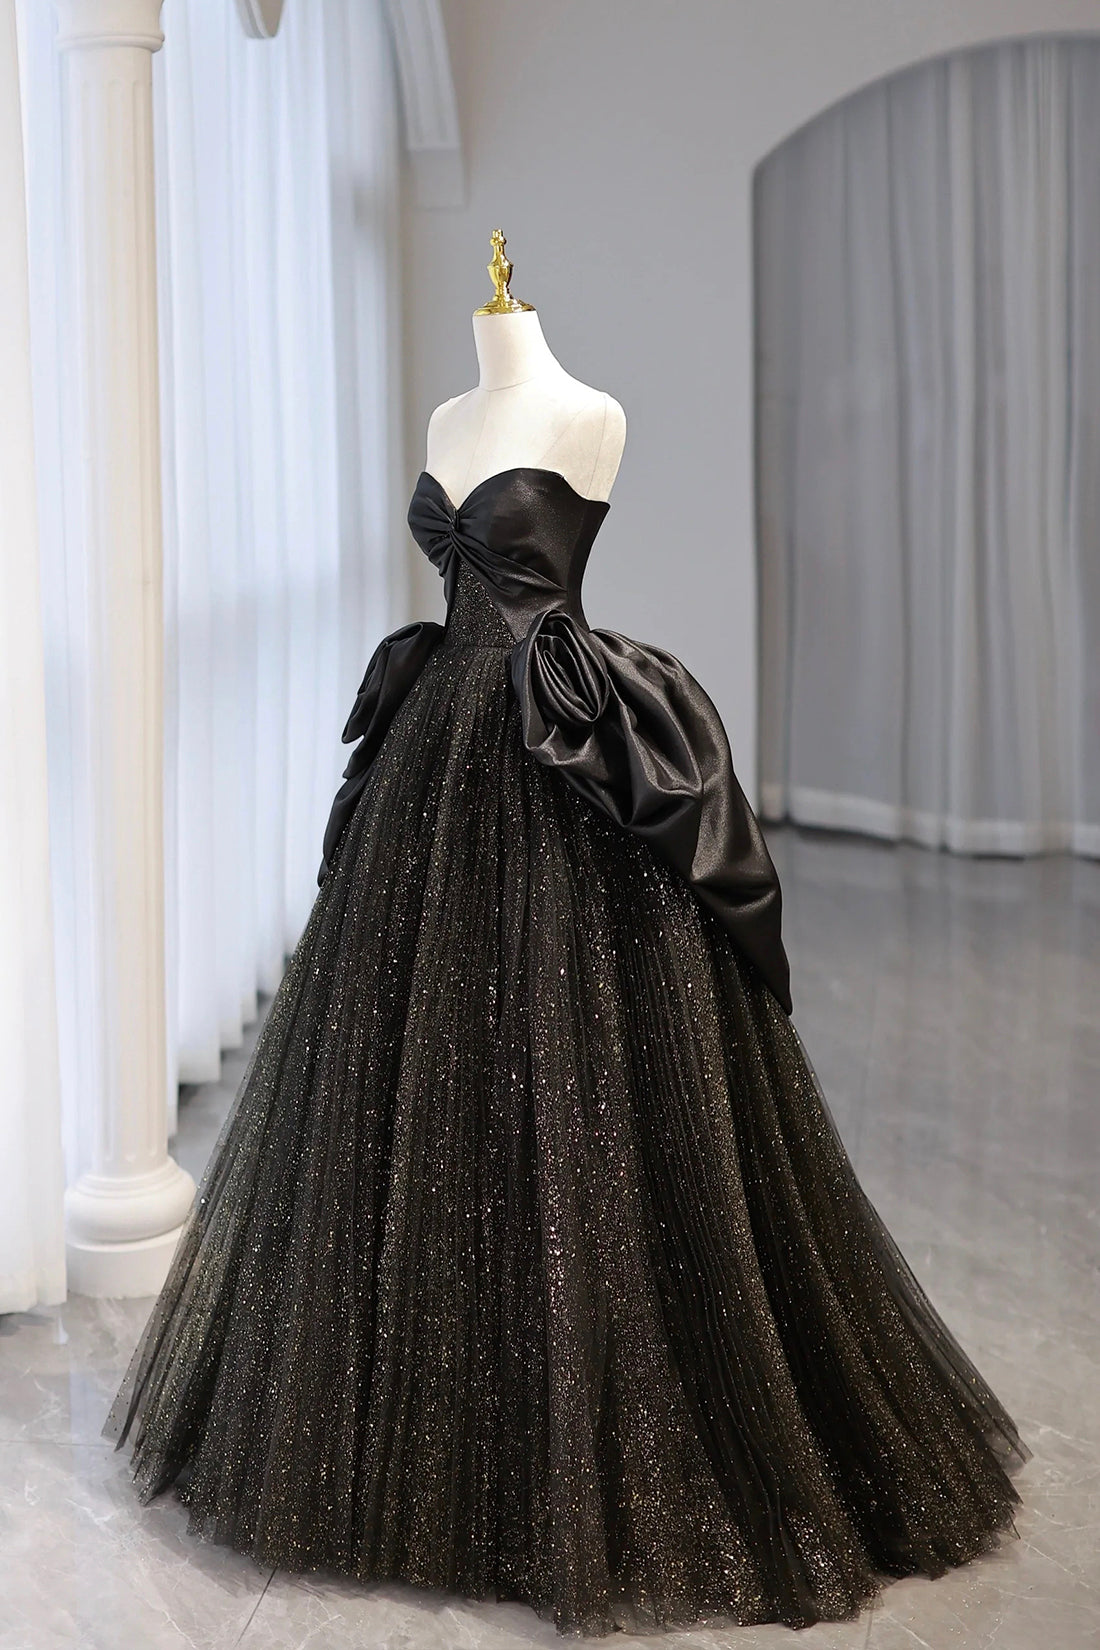 Black Strapless Satin and Tulle Long Prom Dress, Beautiful A-Line Evening Party Dress